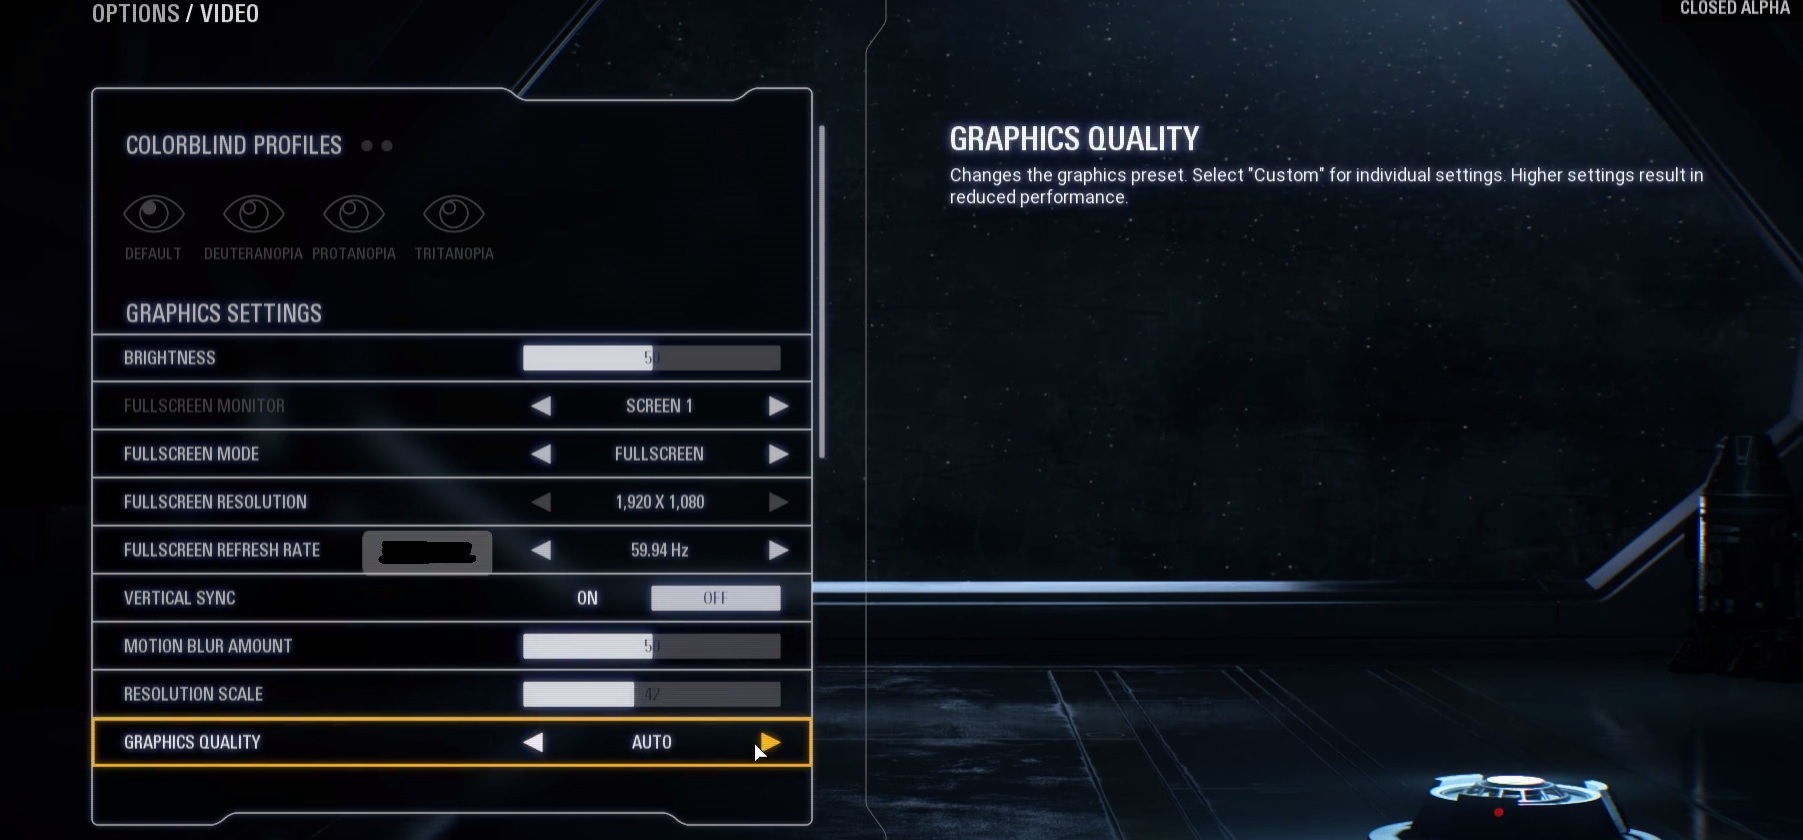 Launch BattlefrontII.exe and go to the game's settings or options menu.
Lower the graphics settings, such as resolution, texture quality, and effects, to reduce the strain on your system.